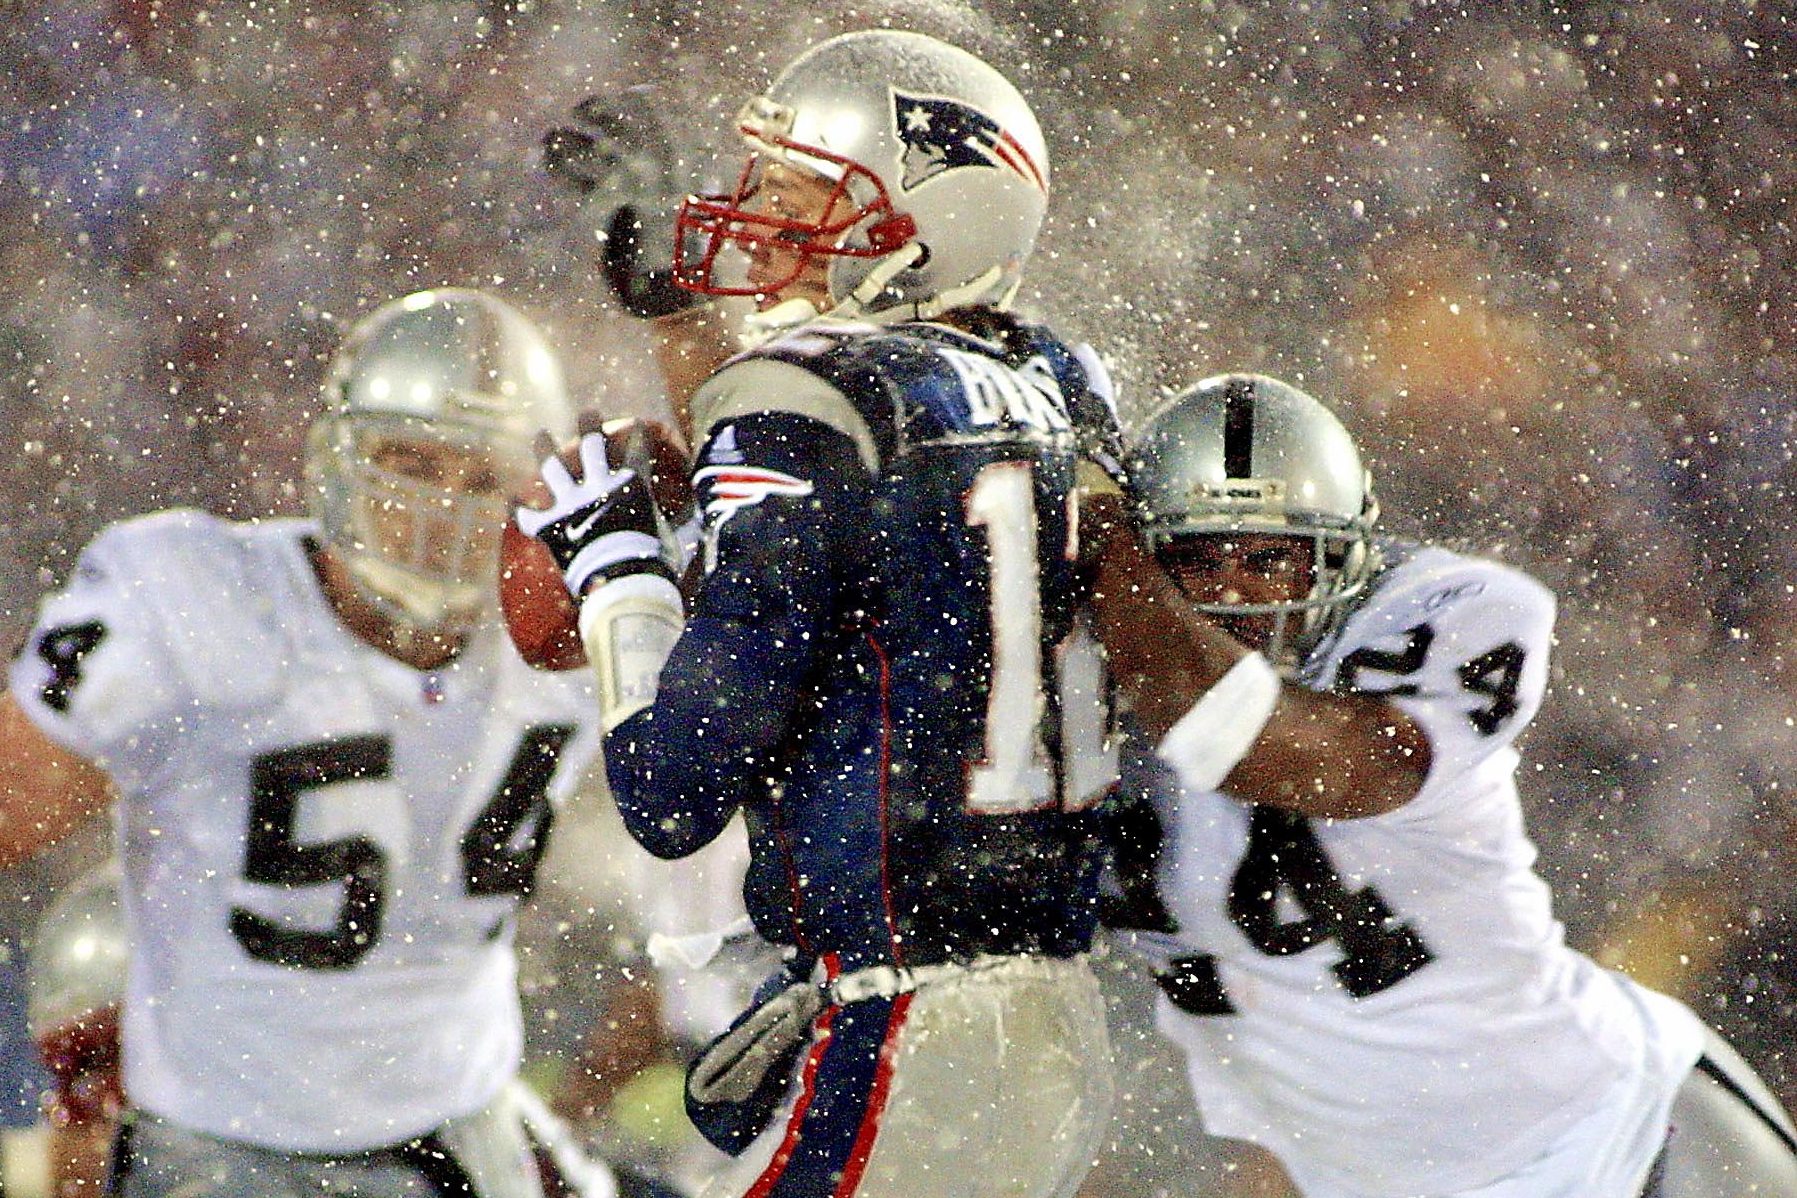 Tom Brady takes a hit from Charles Woodson on a pass attempt in their AFC playoff game in 2002